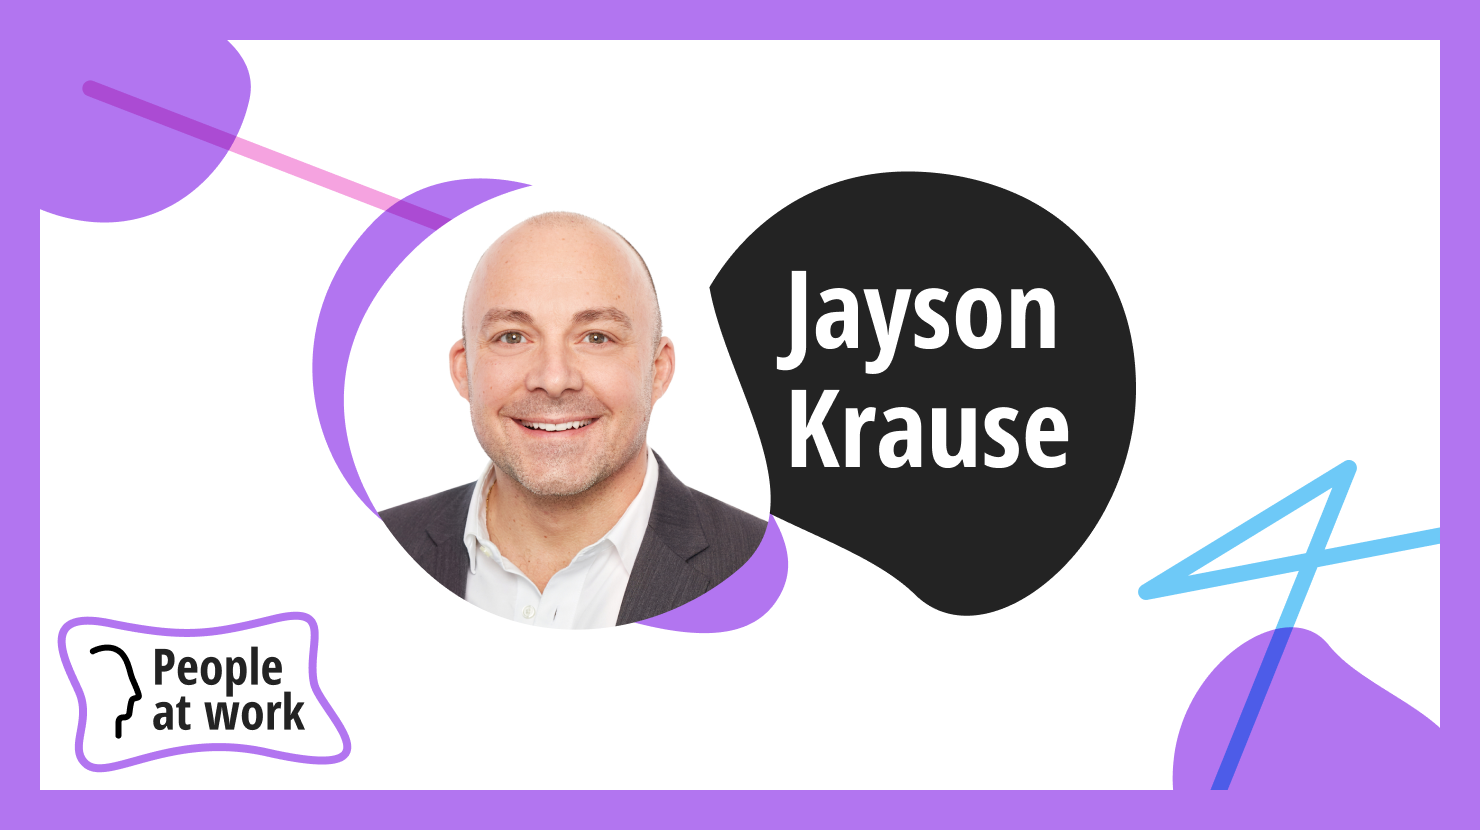 Practice extreme intentionality with Jayson Krause